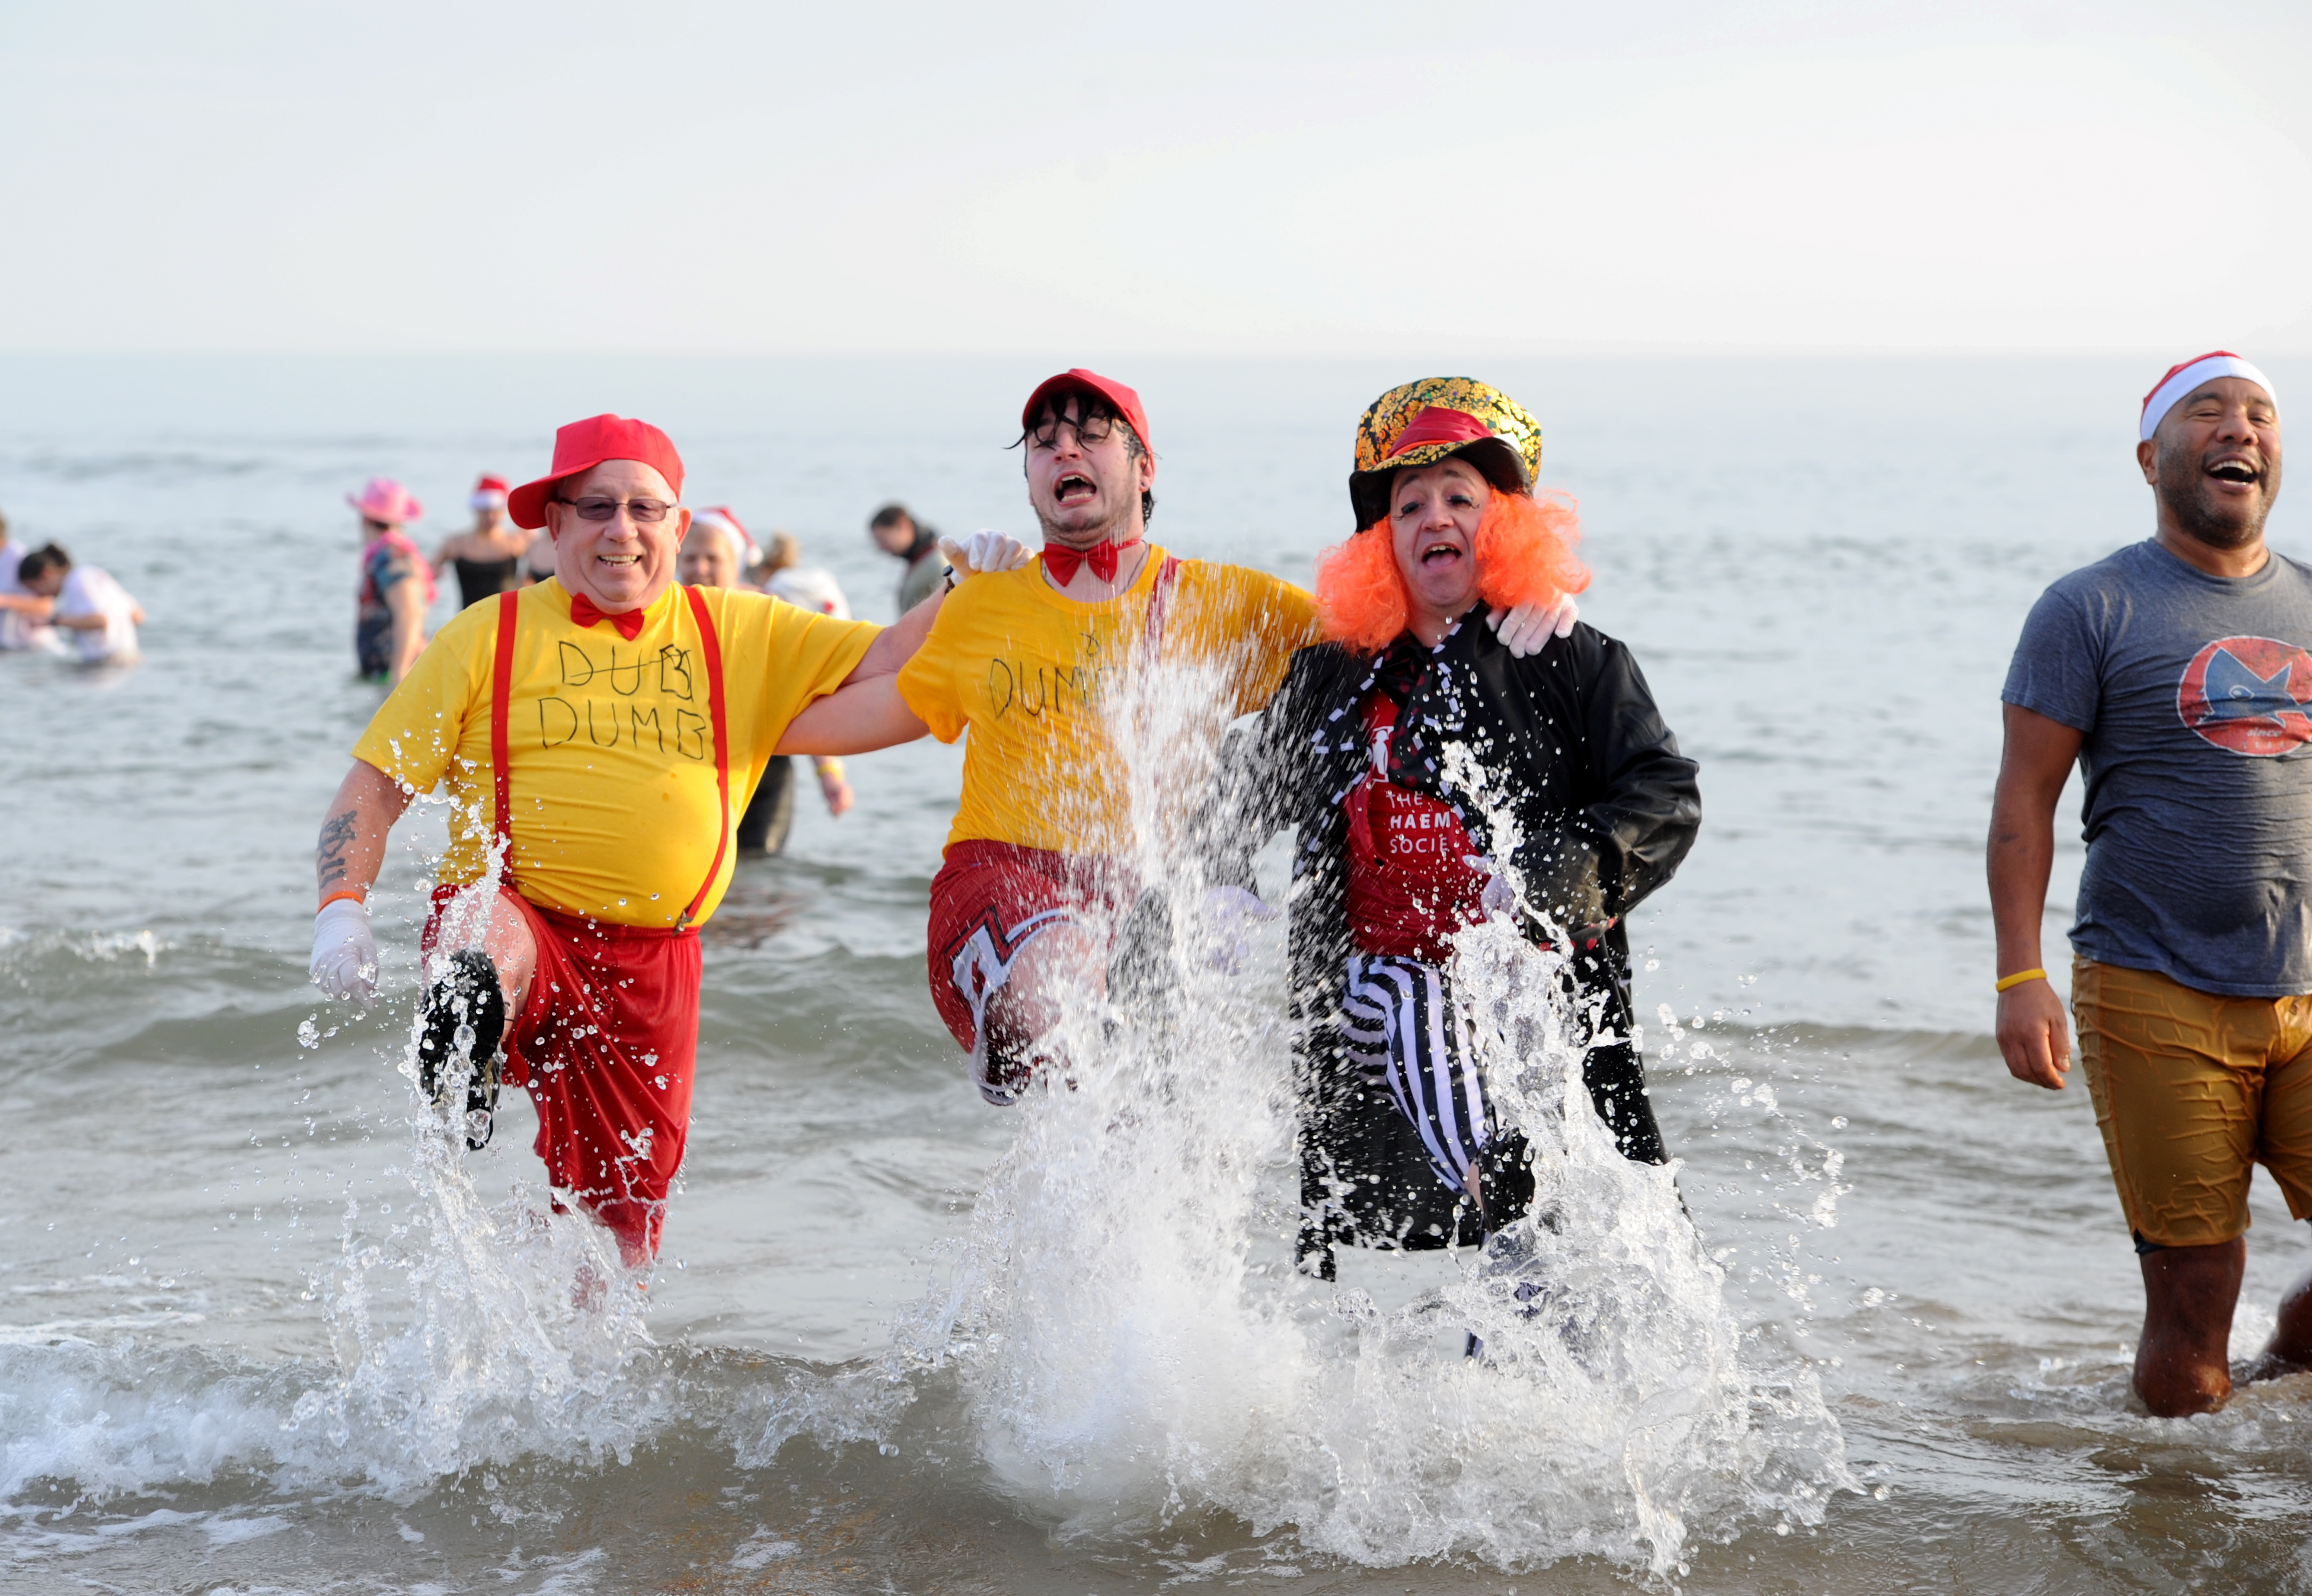 Hundreds took part in the Boxing Day Nippy Dipper at Aberdeen Beach. (Picture by Darrell Benns)